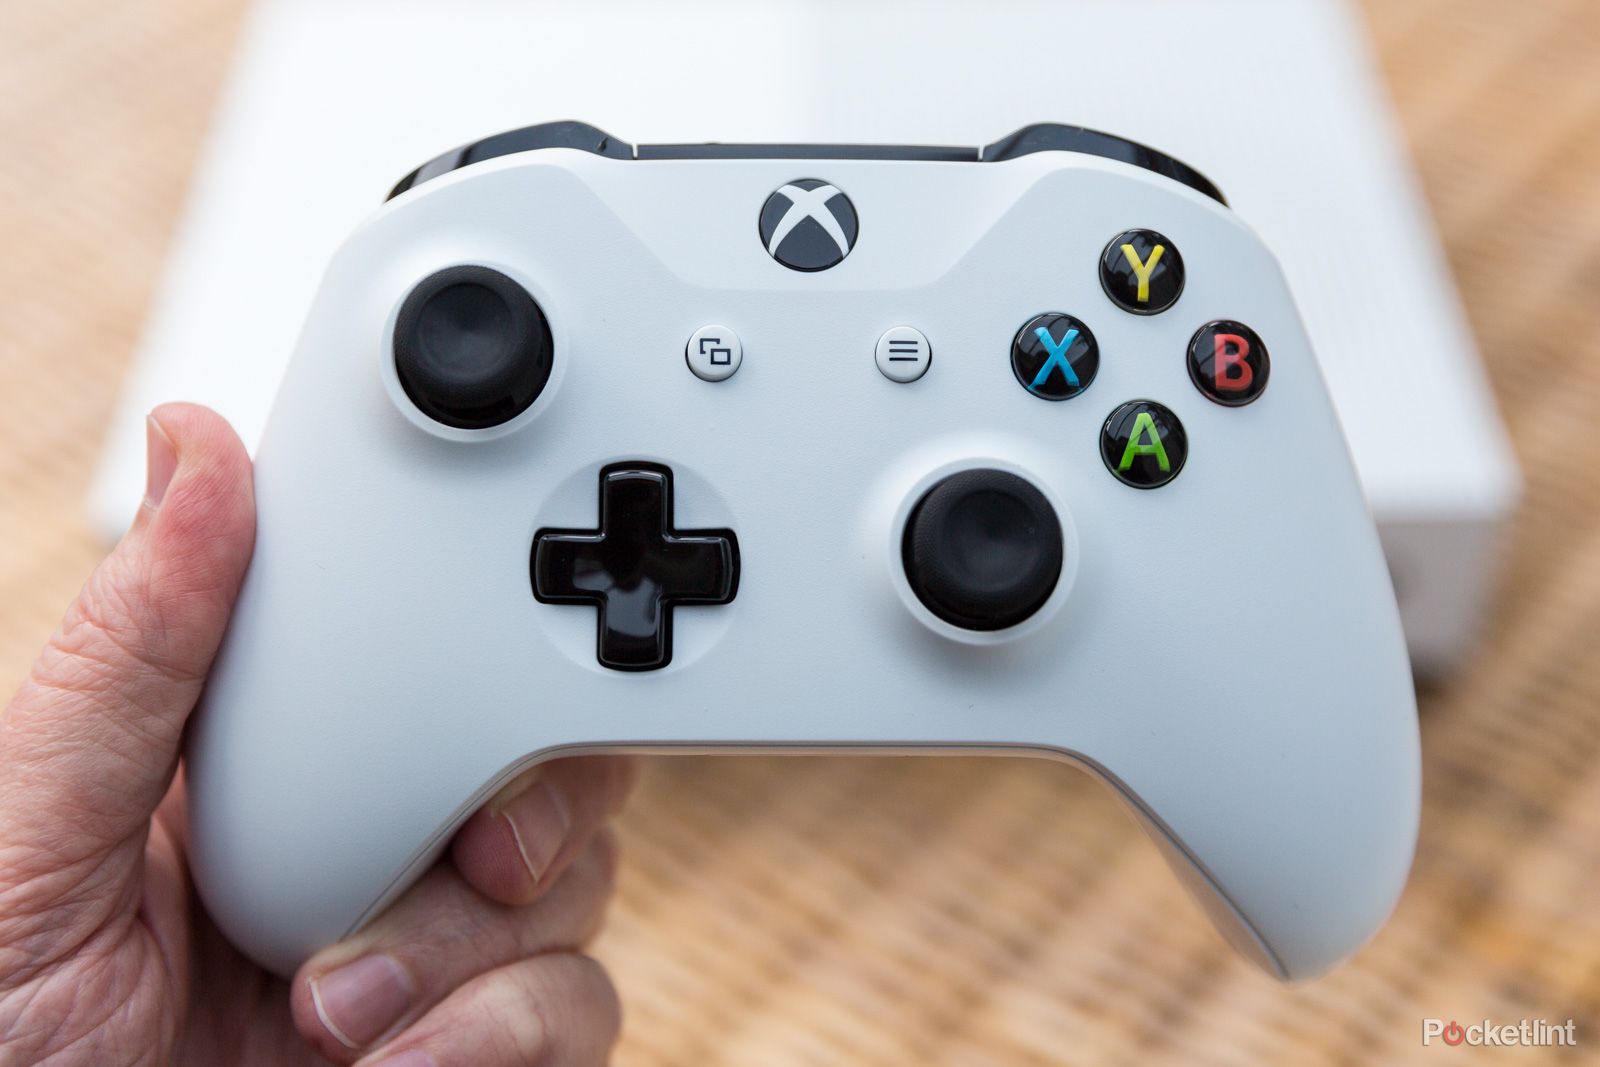 Xbox One S All-Digital Edition product shots image 8